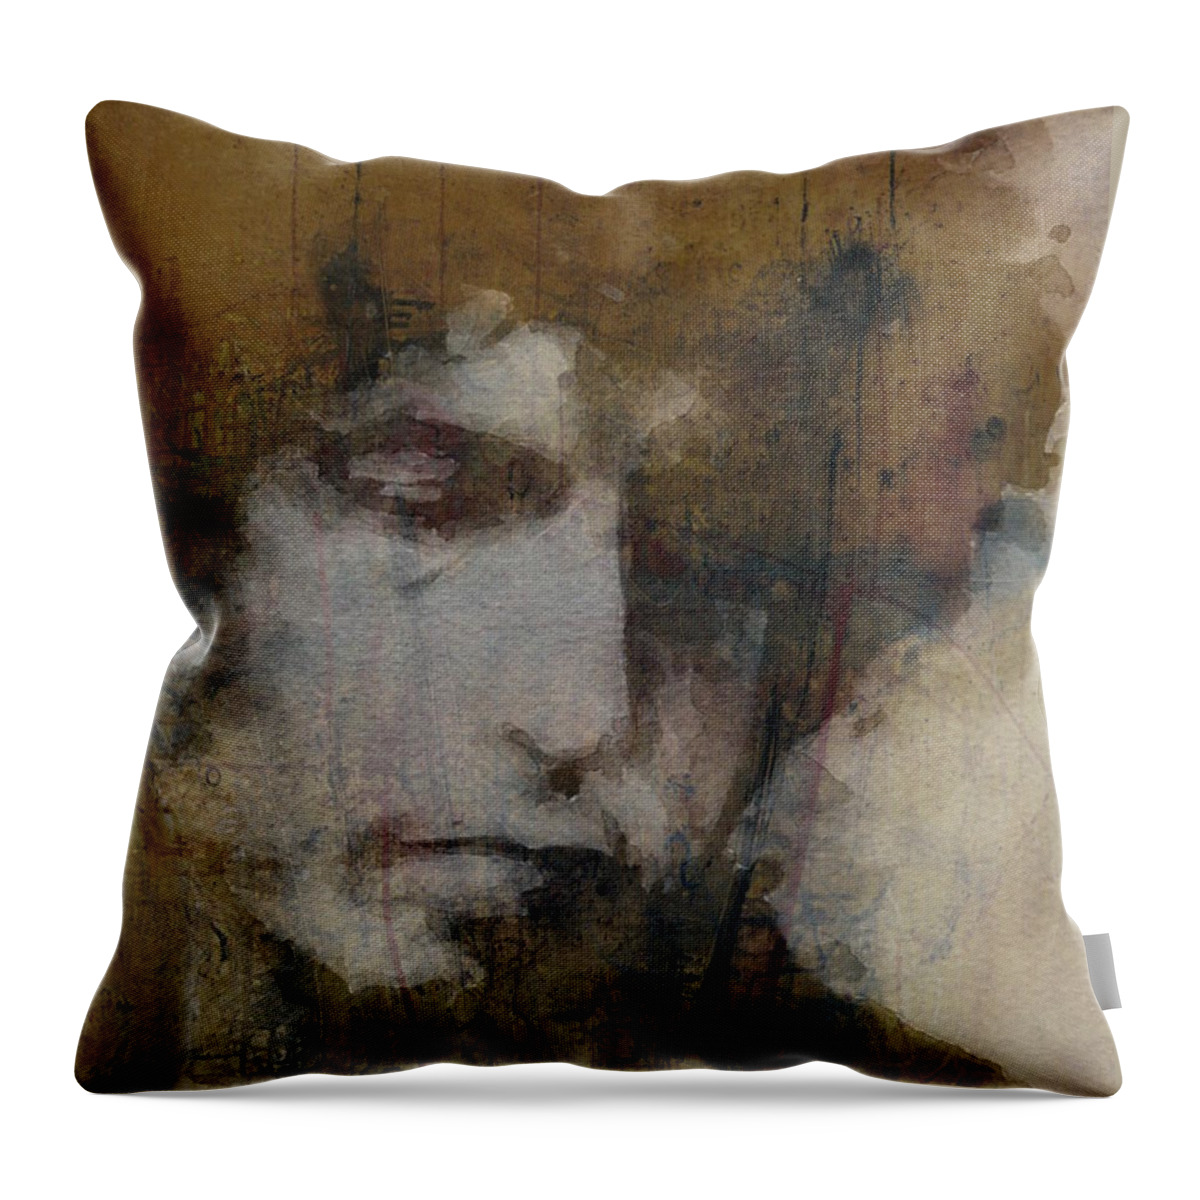 Bob Dylan Throw Pillow featuring the mixed media Bob Dylan - The Times They Are A Changin' by Paul Lovering